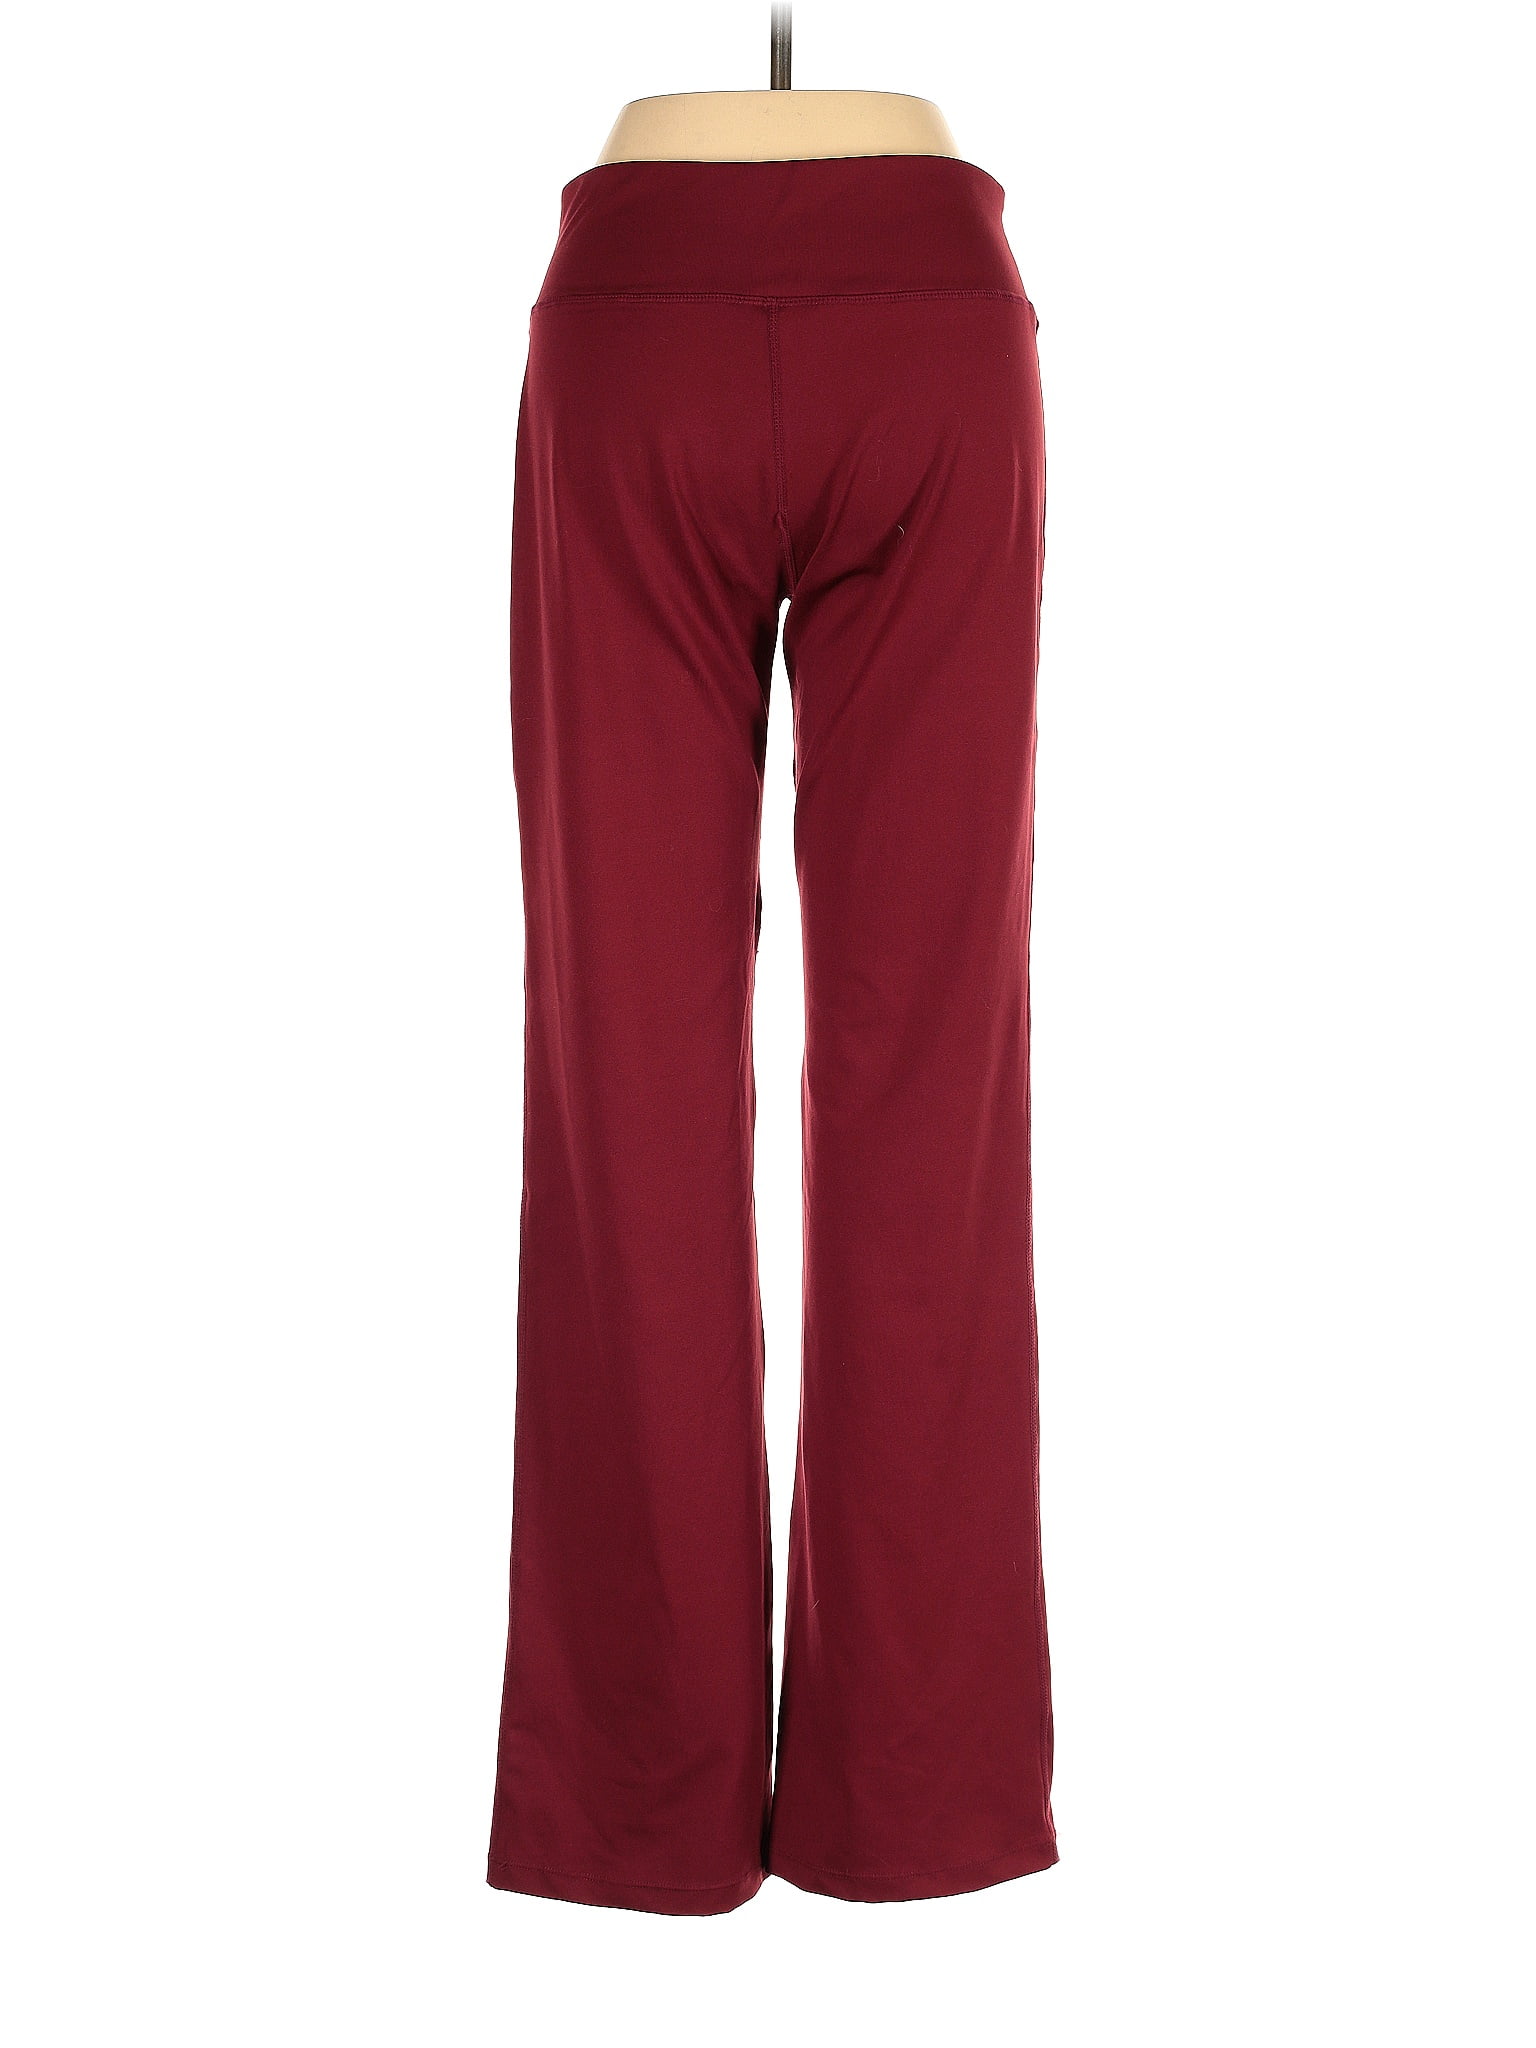 Hiskywin Burgundy Track Pants Size S - 50% off